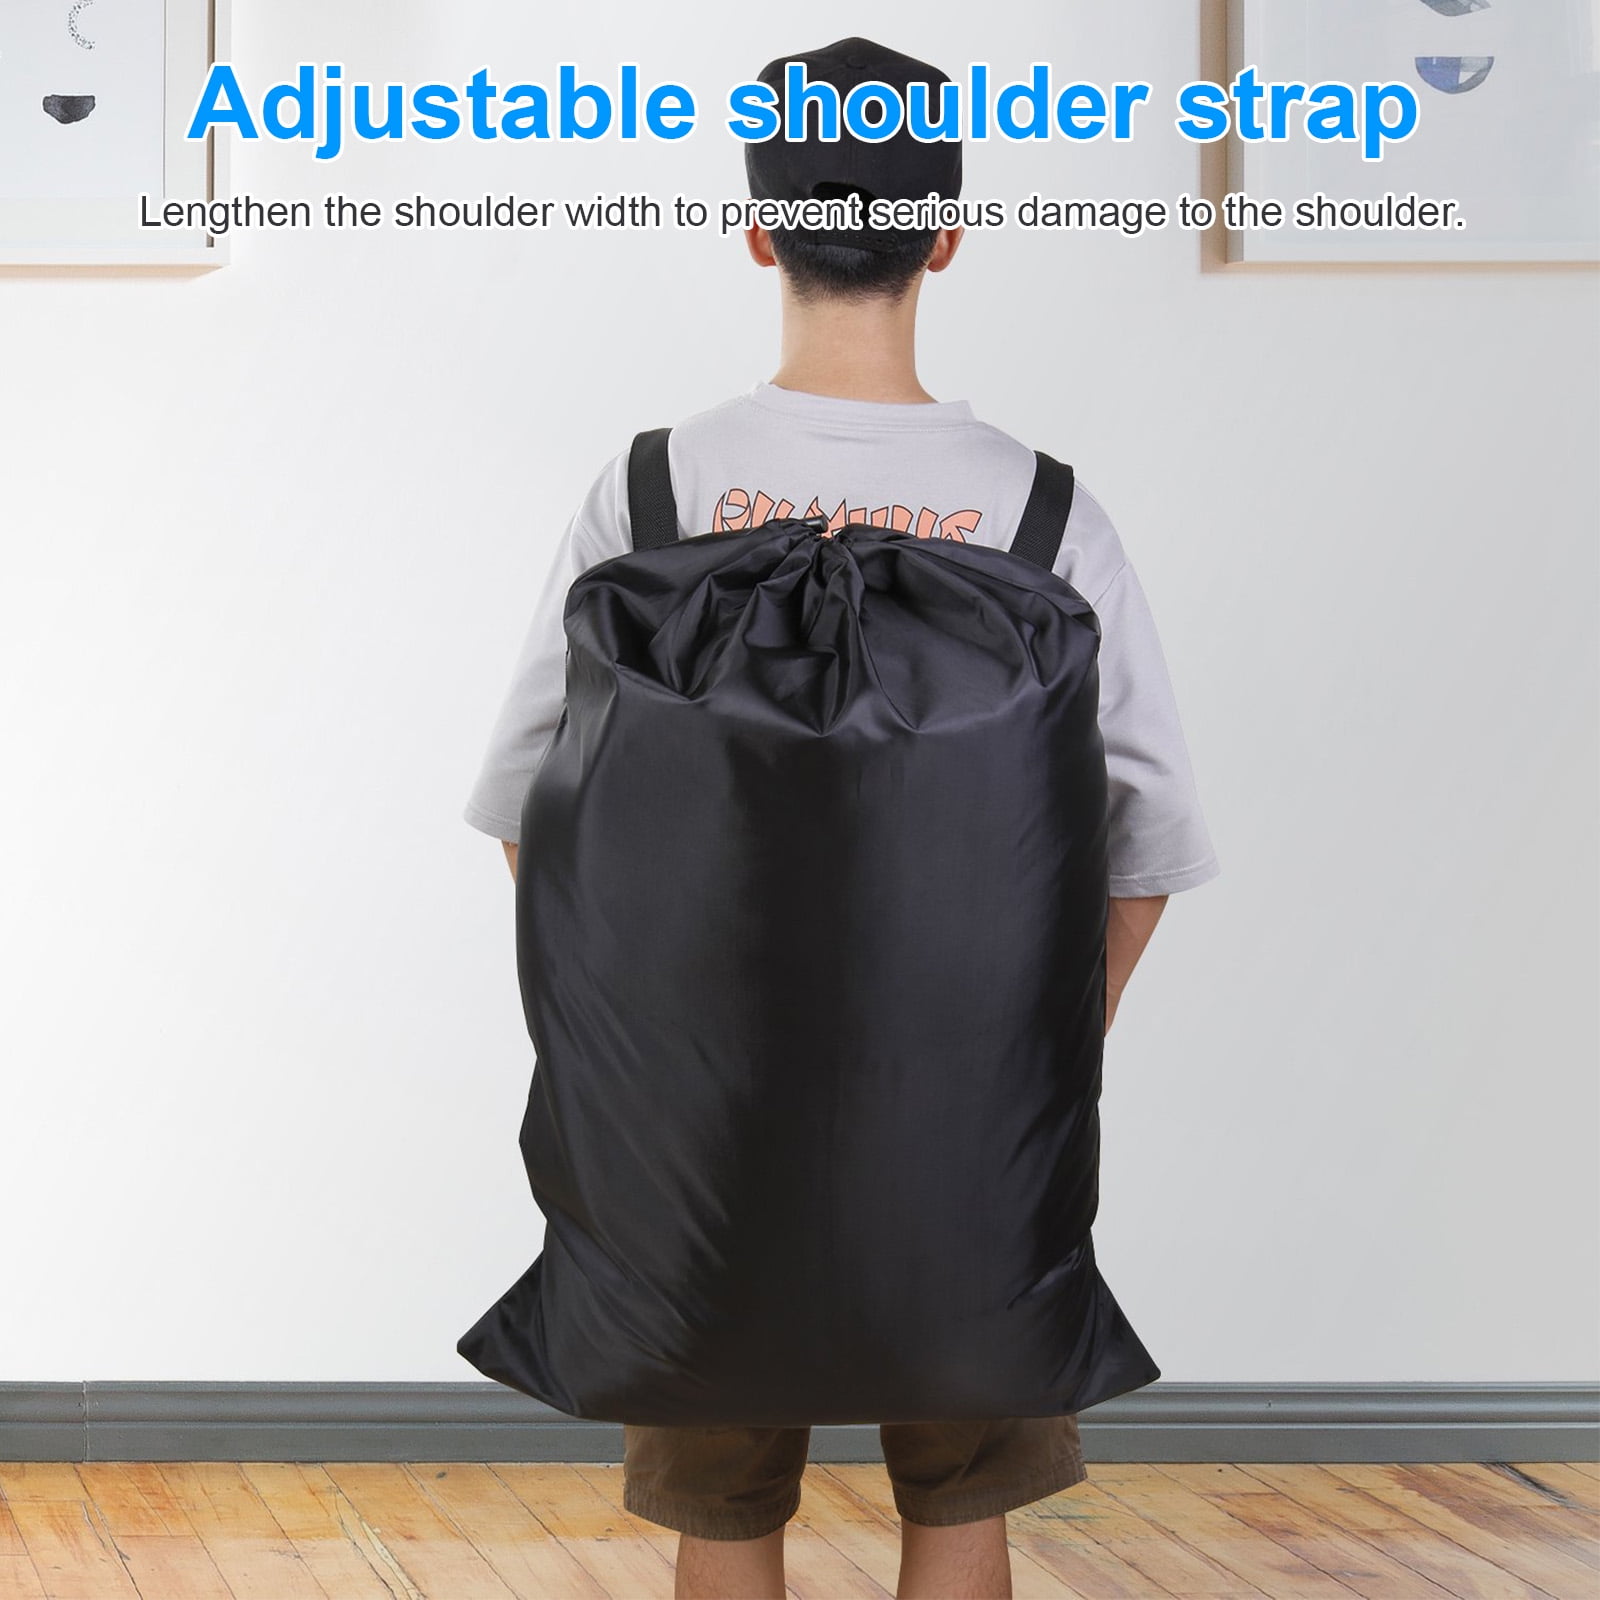 OUDXVEE Black Laundry Bag Backpack Extra Large 115L Durable Clothes Hamper with Adjustable Shoulder Straps and Drawstring Closure Heavy Duty Laundromat Bag